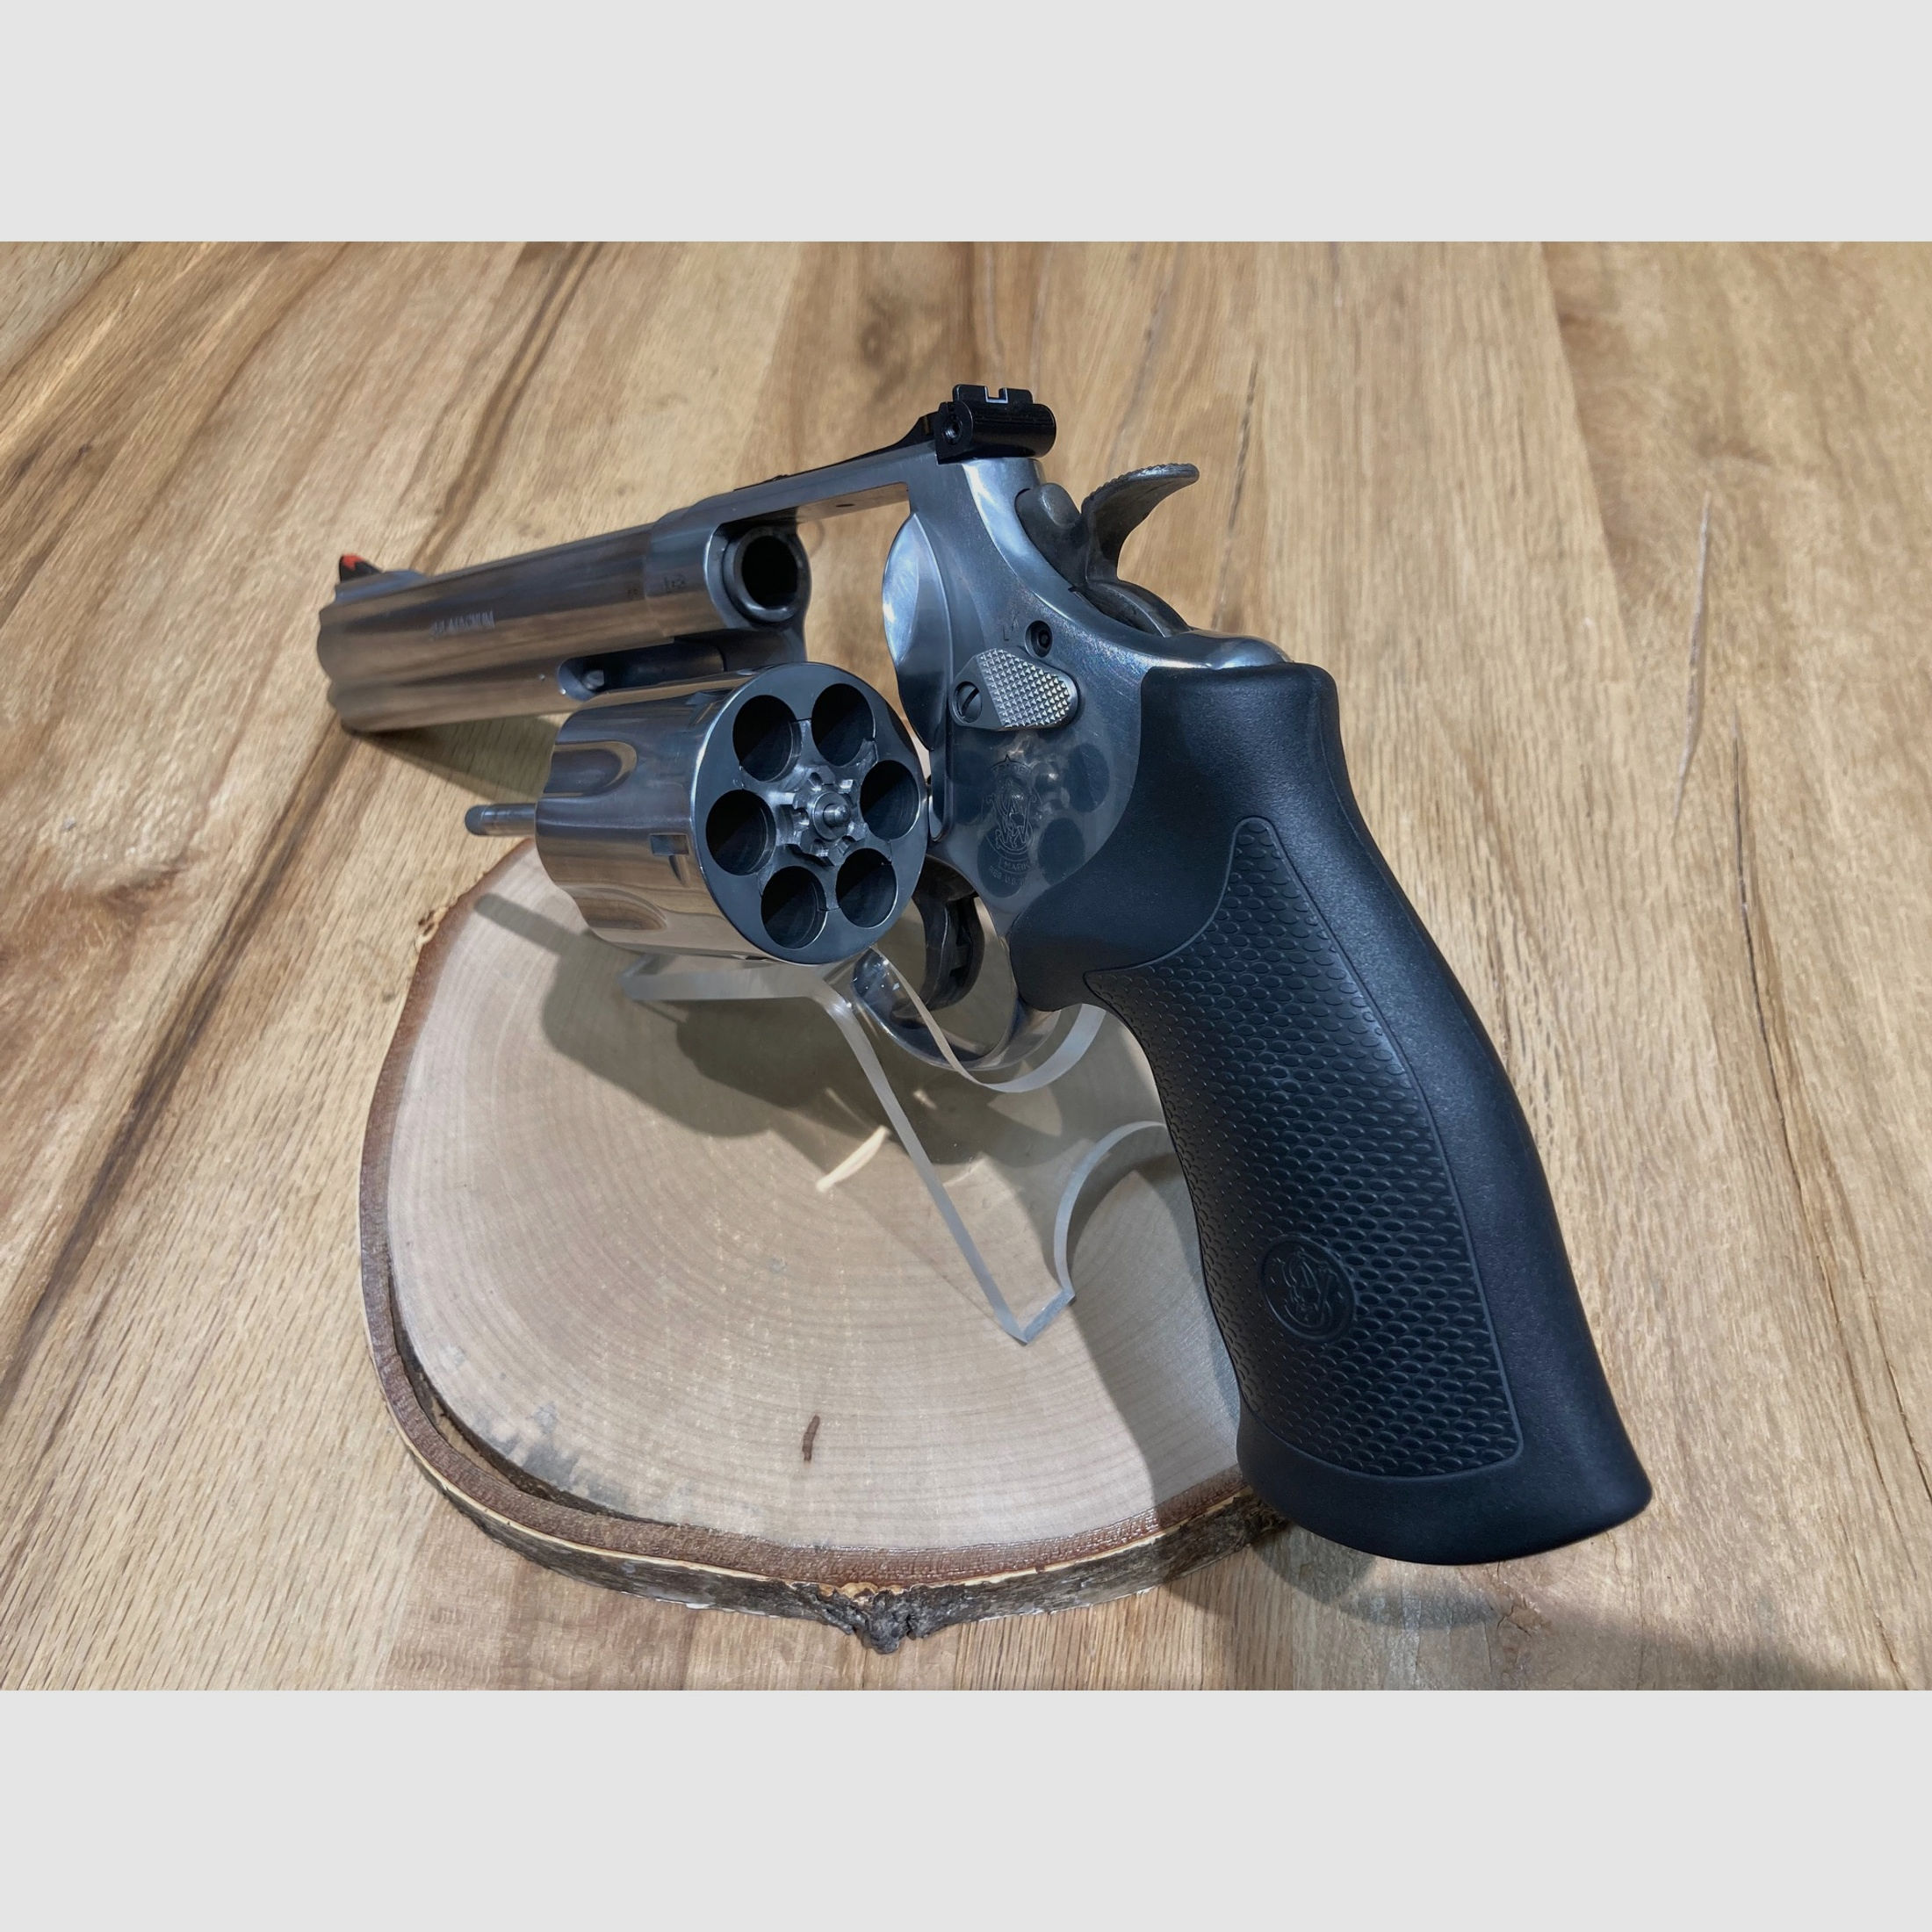 Smith & Wesson, Mod. 629 Classic